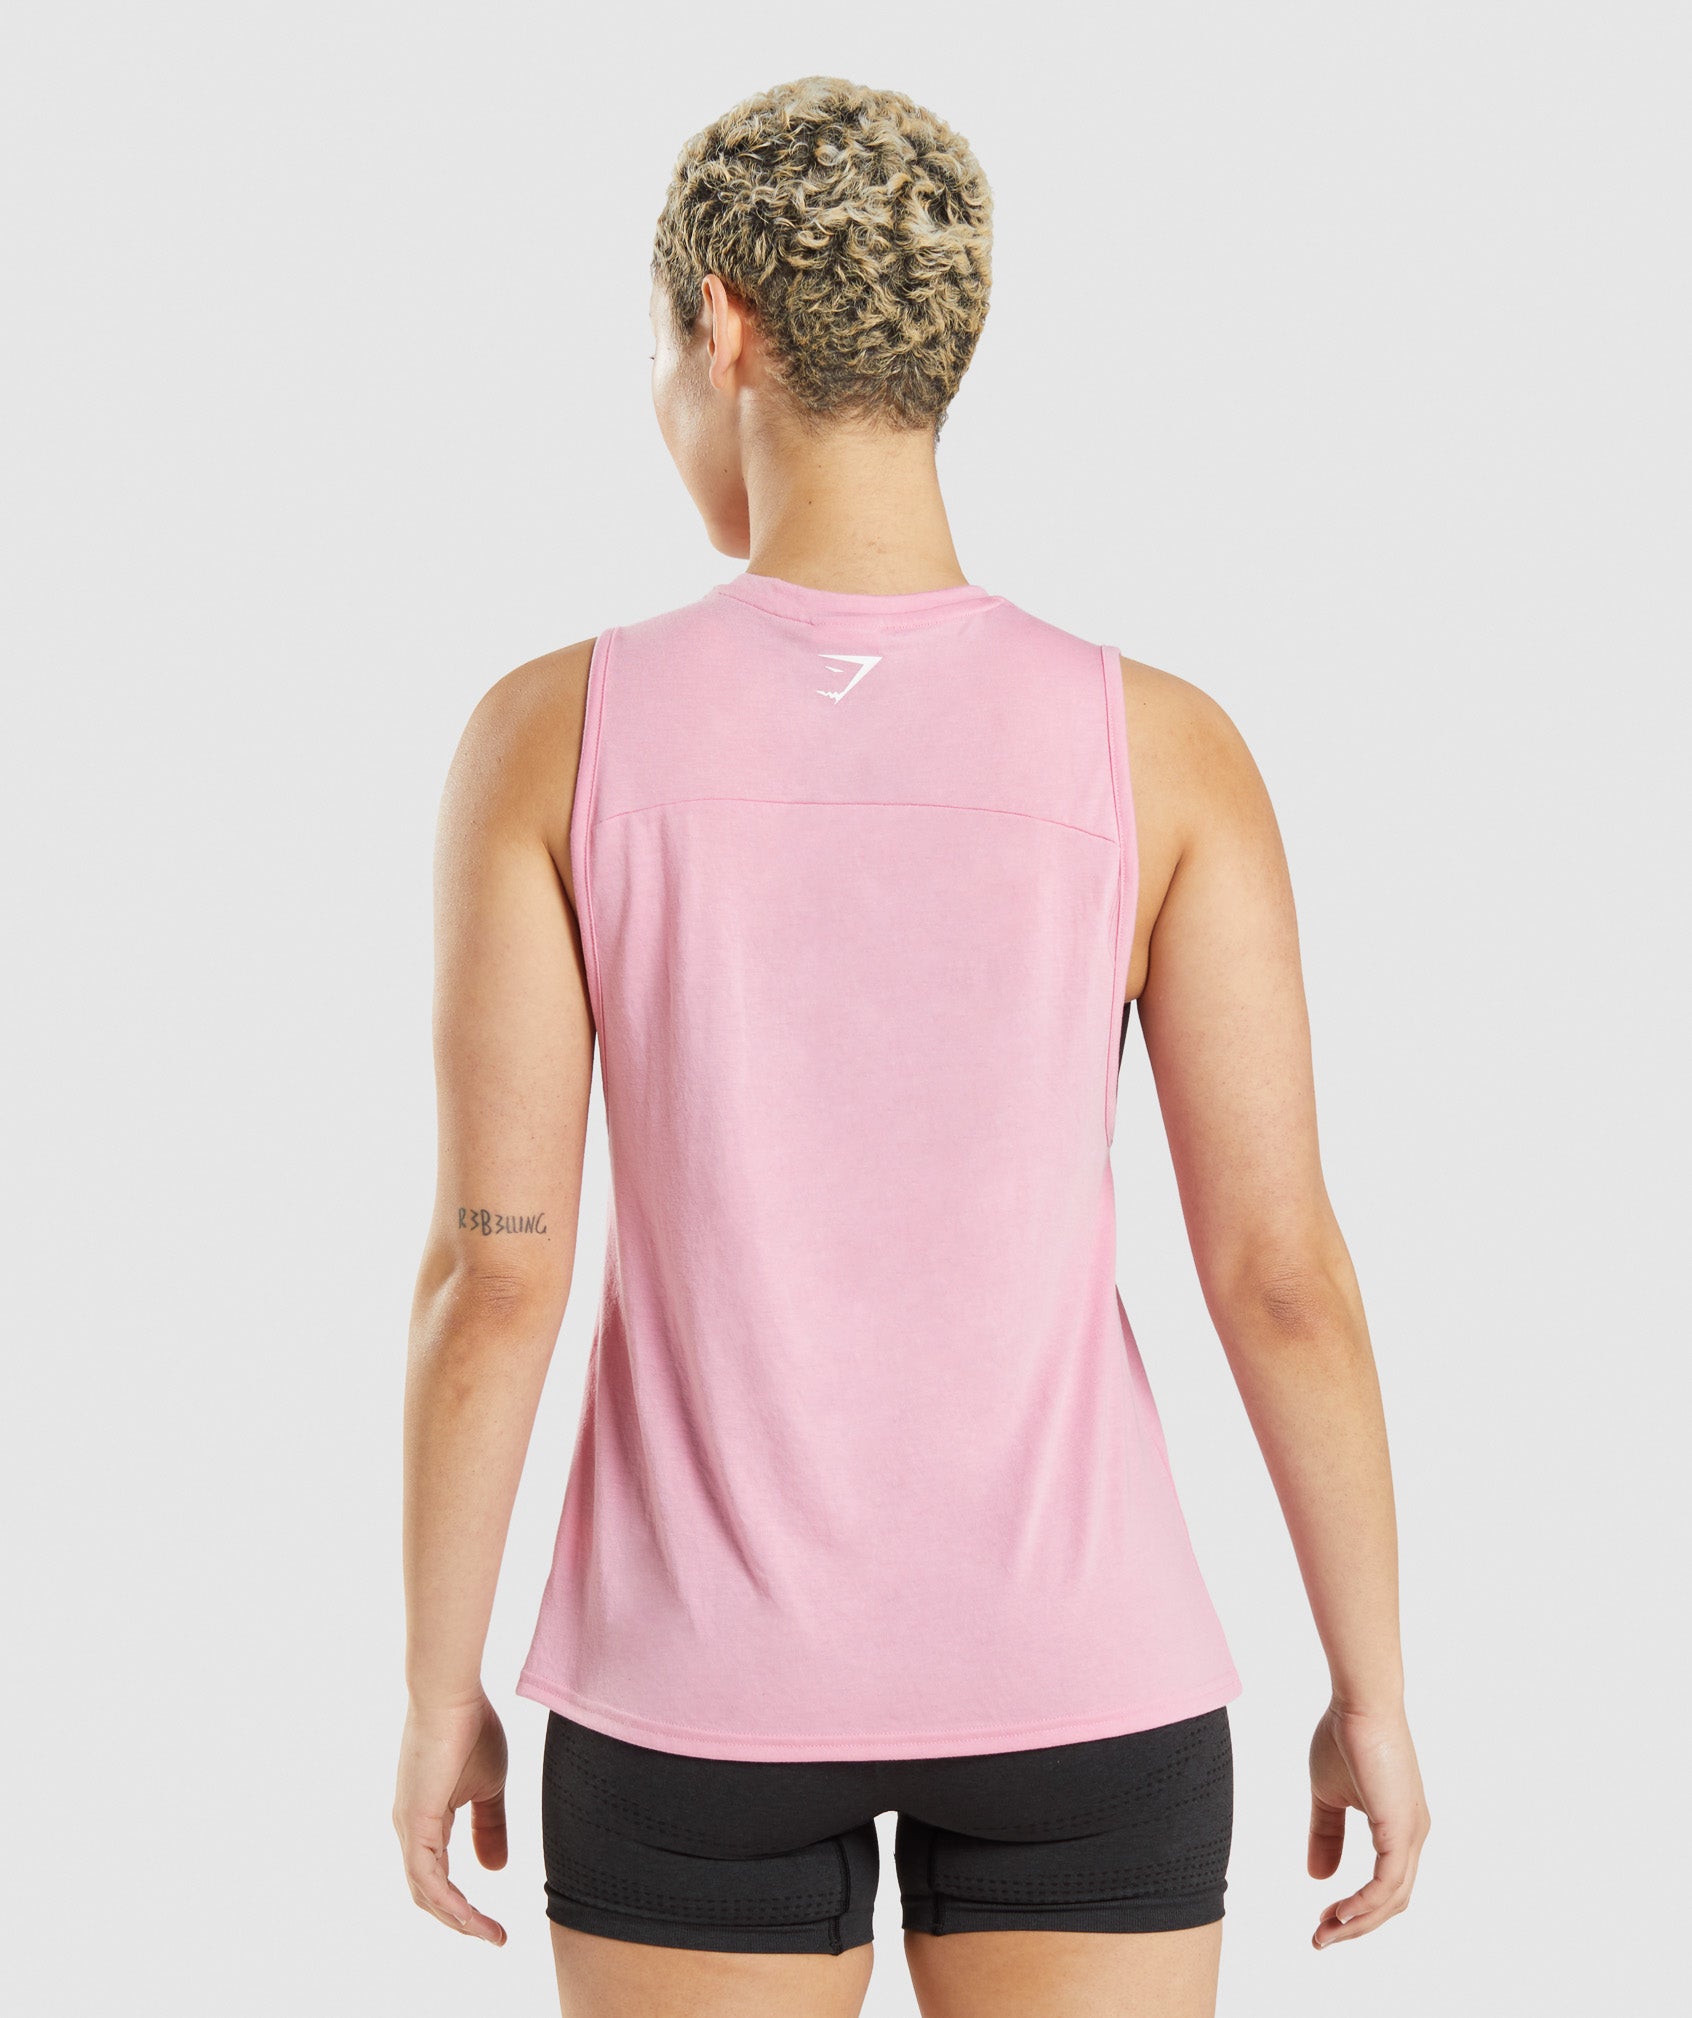 Its All You Drop Arm Tank in Sorbet Pink - view 2